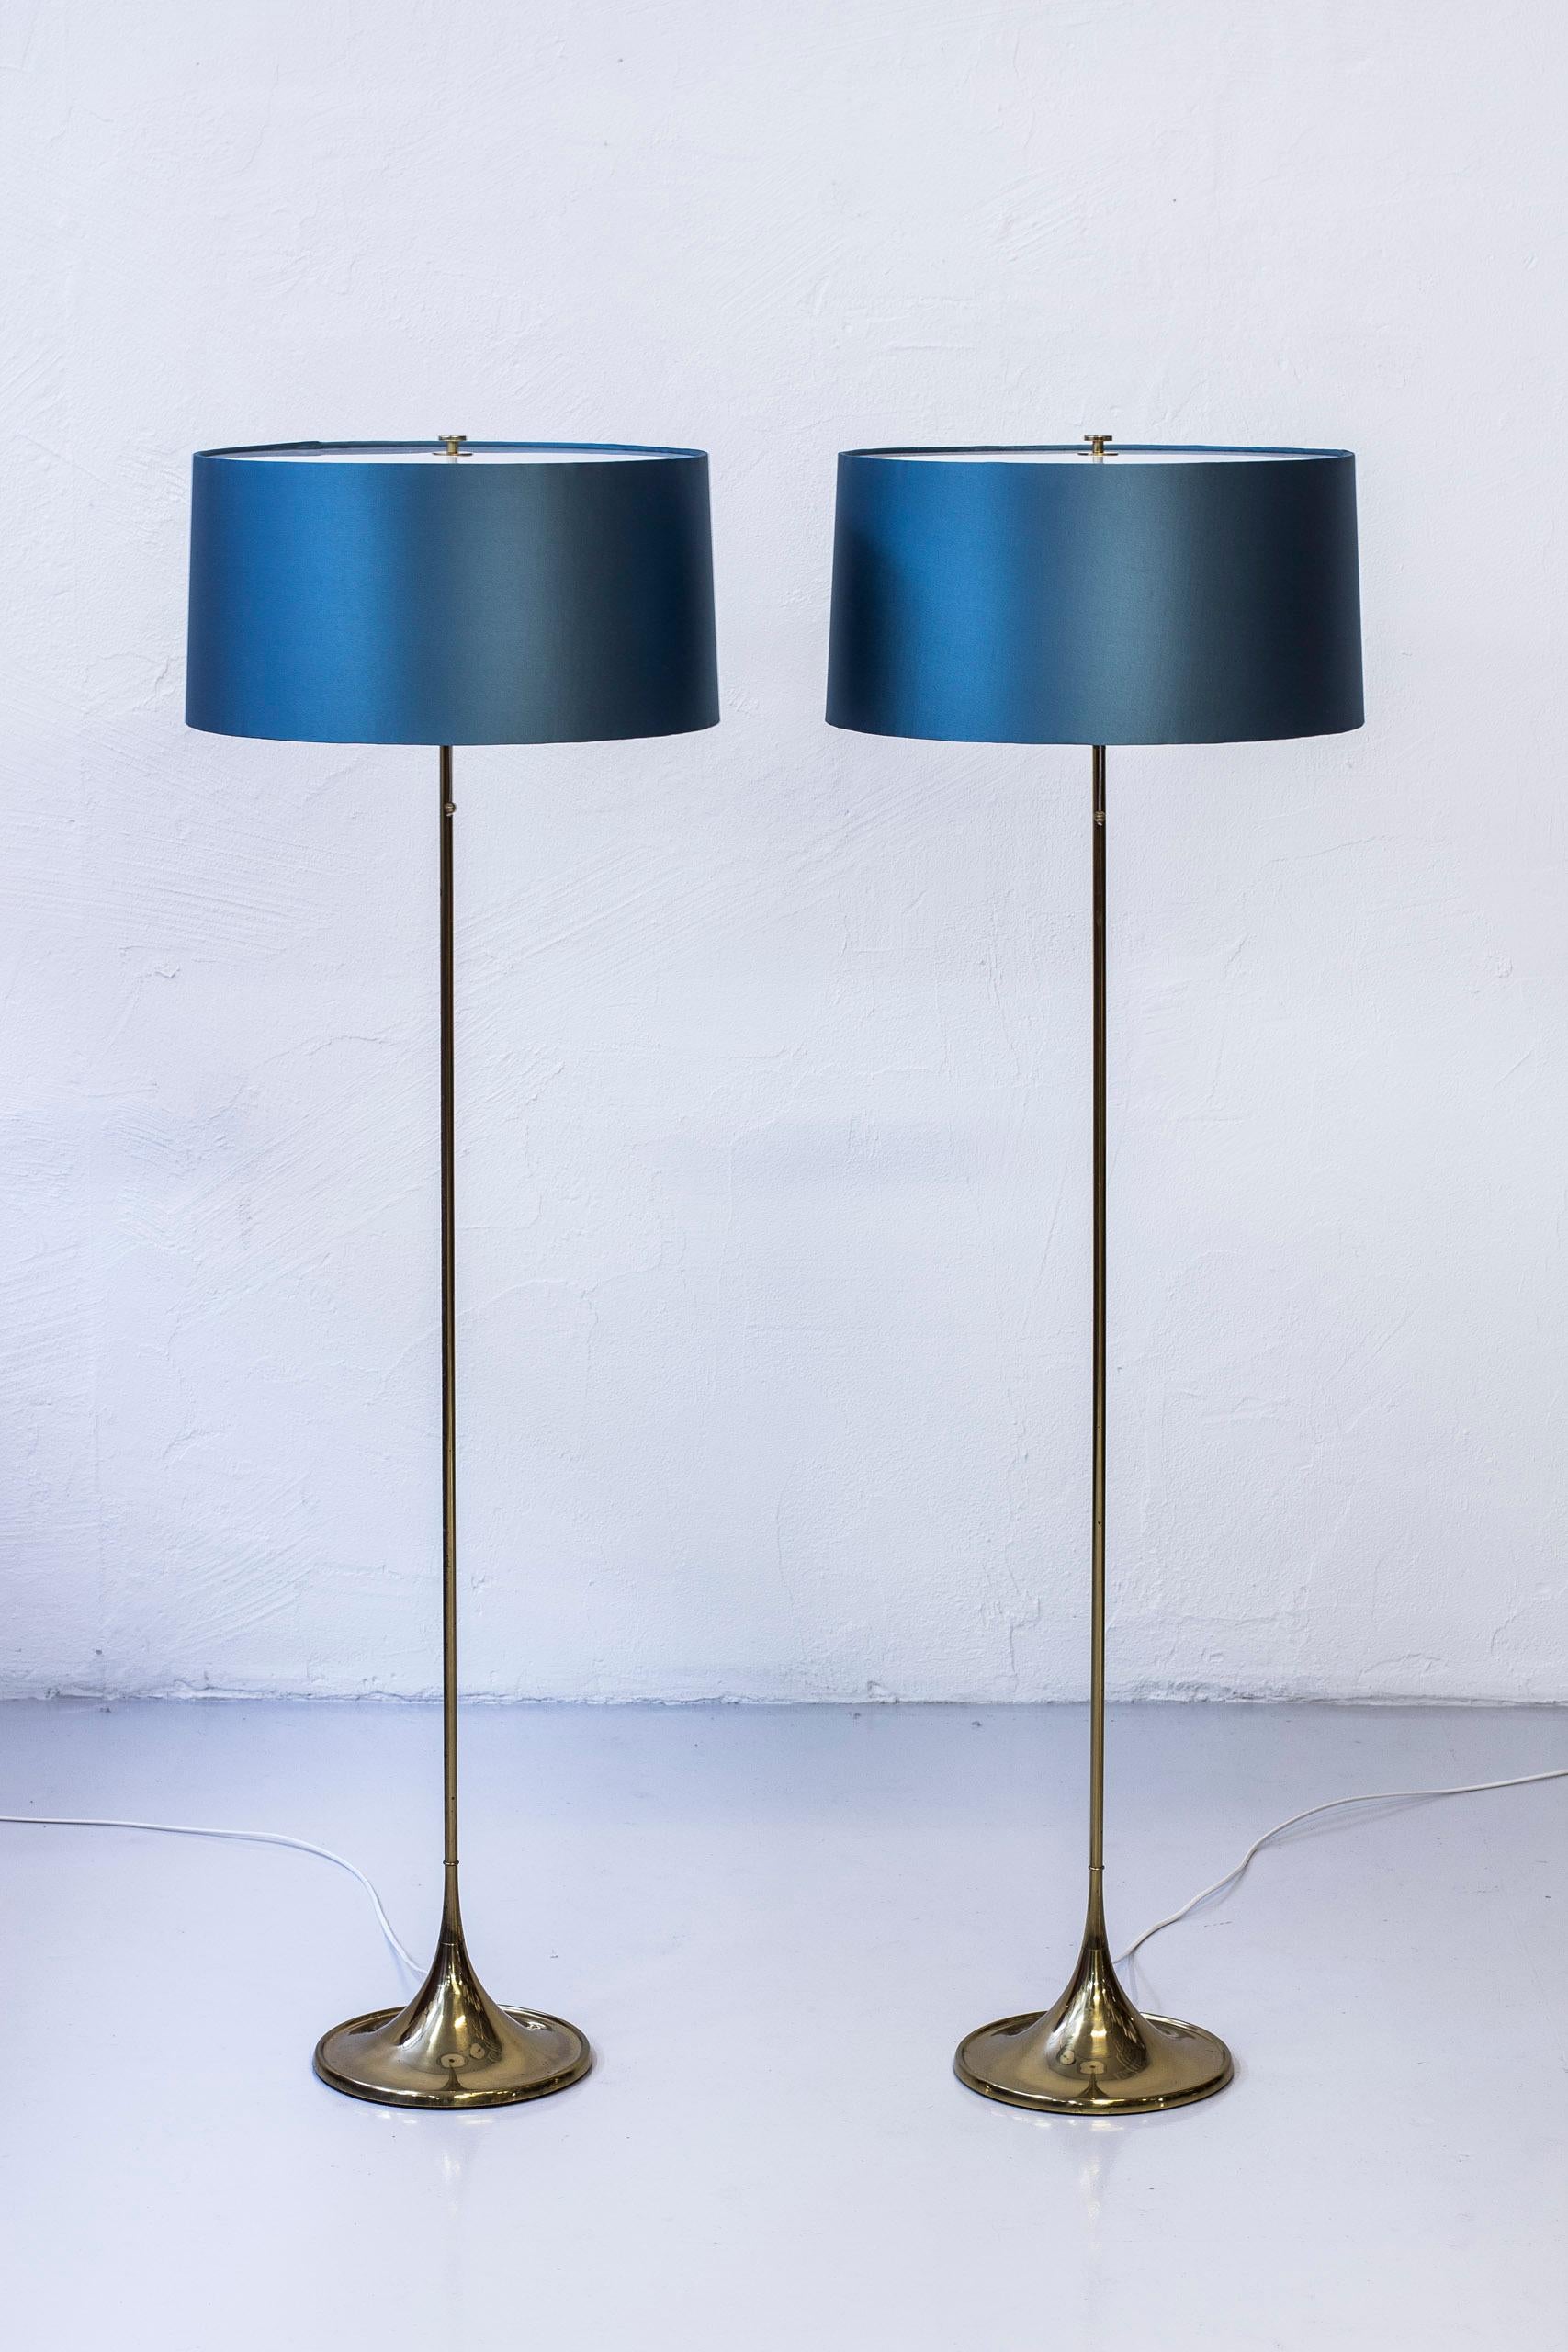 Pair of floor lamps model G-024 designed by Alf Svensson and Yngvar Sandström and their designs studio S-Design. Produced by Bergboms in Malmö, Sweden, circa 1961.  Made form polished brass with cast iron in the base. Lamp shades with acrylic top